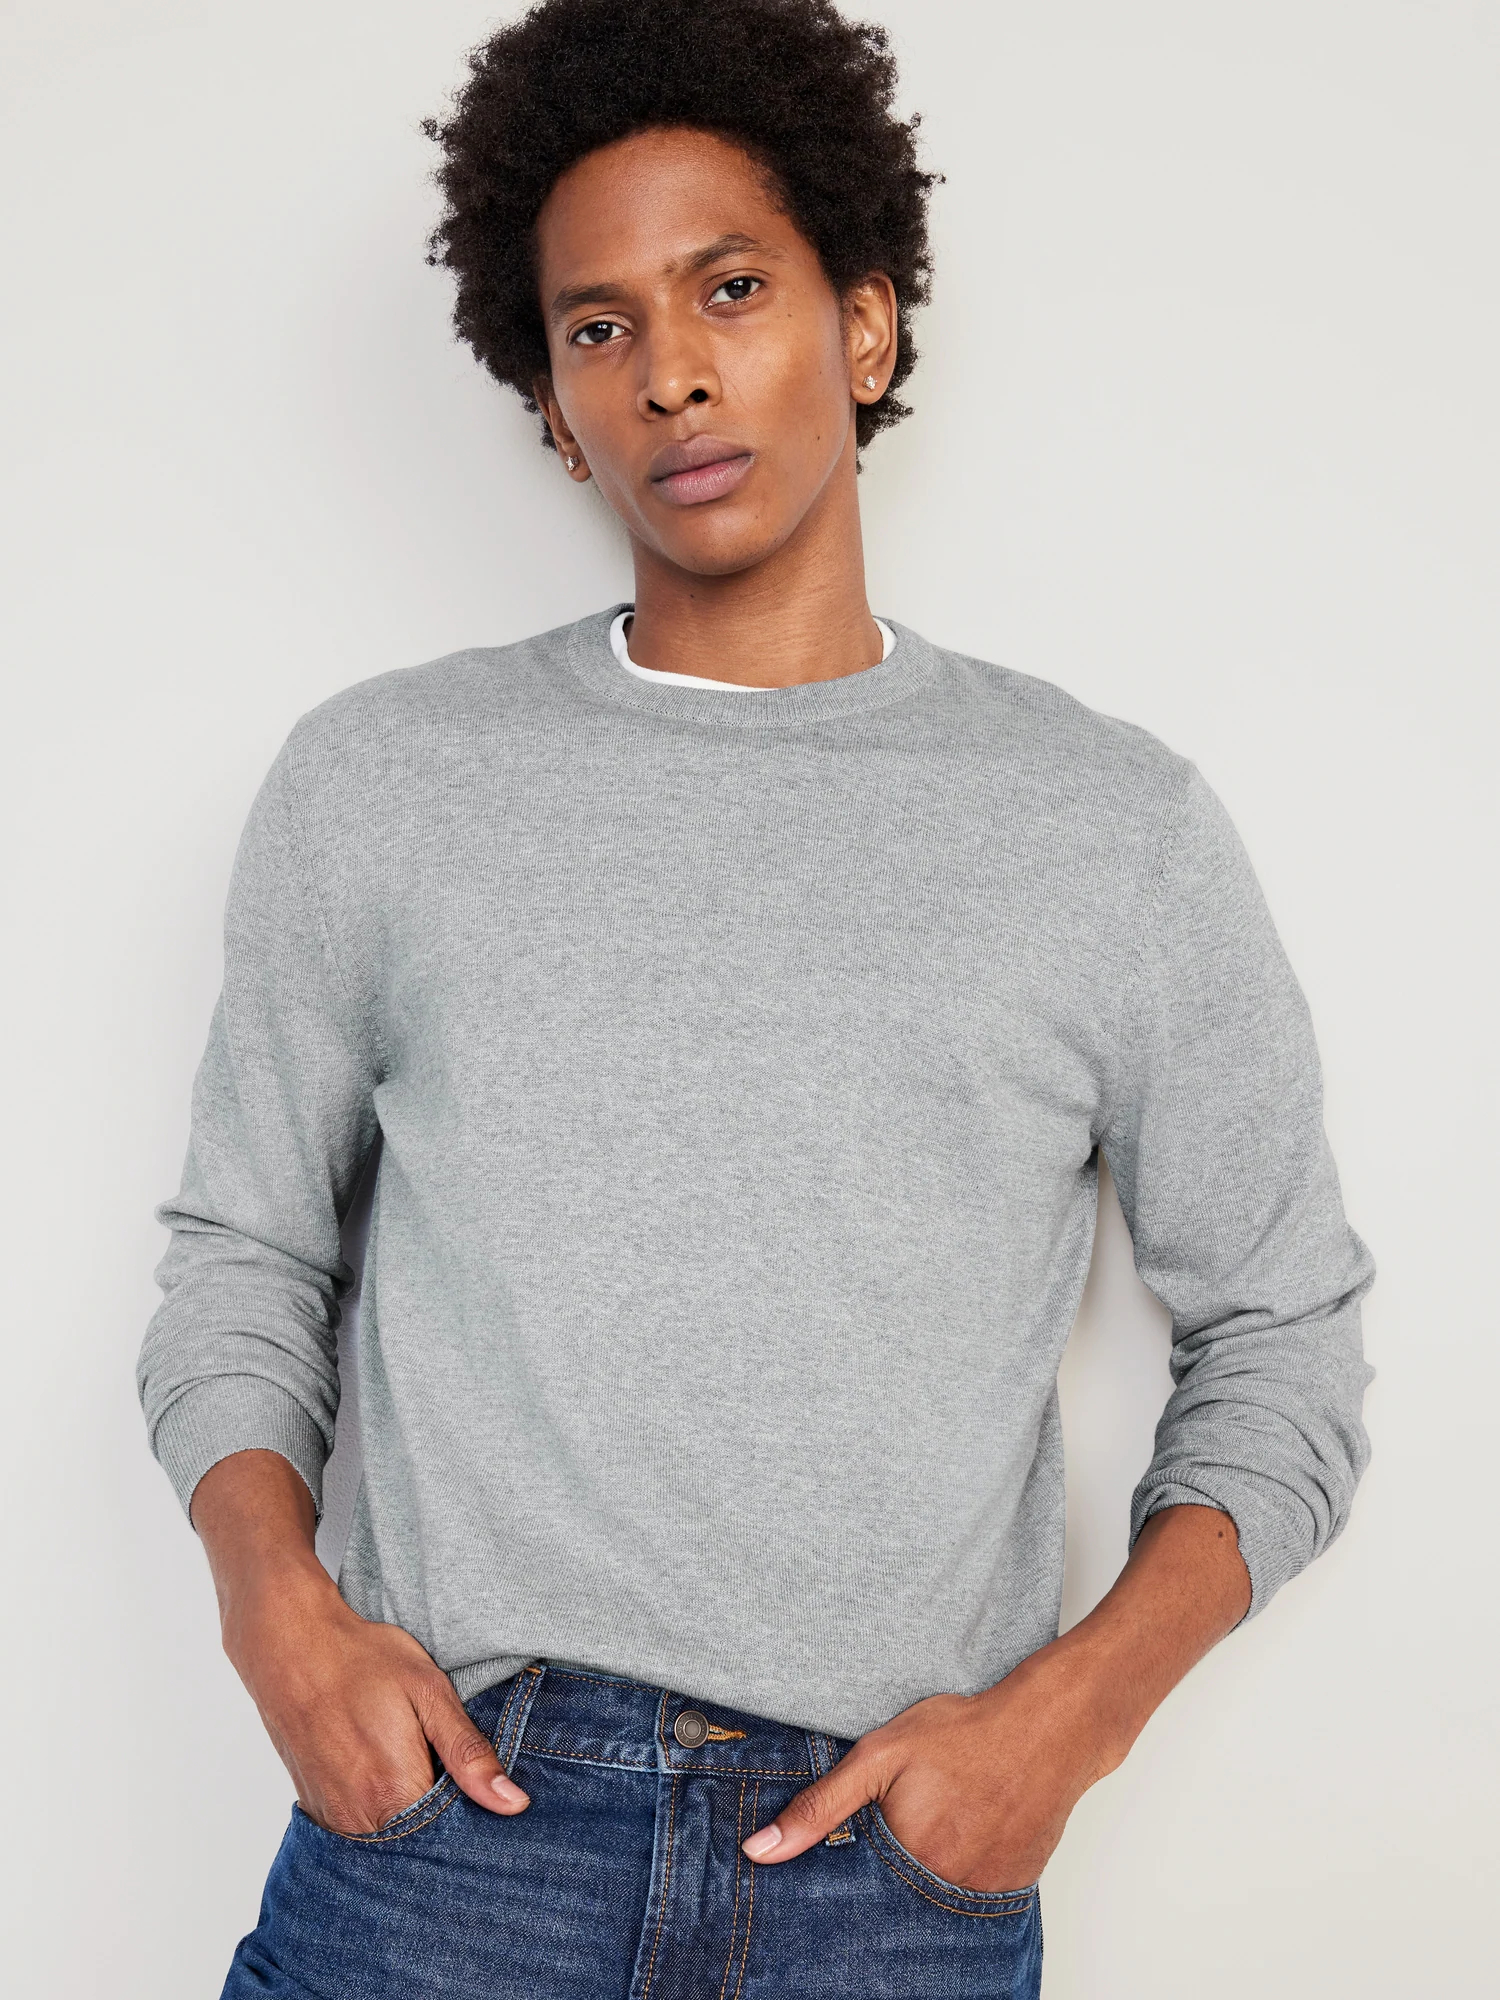 Lightweight summer sweaters, crafted from lightweight and breathable materials such as cotton, linen, or silk-blends